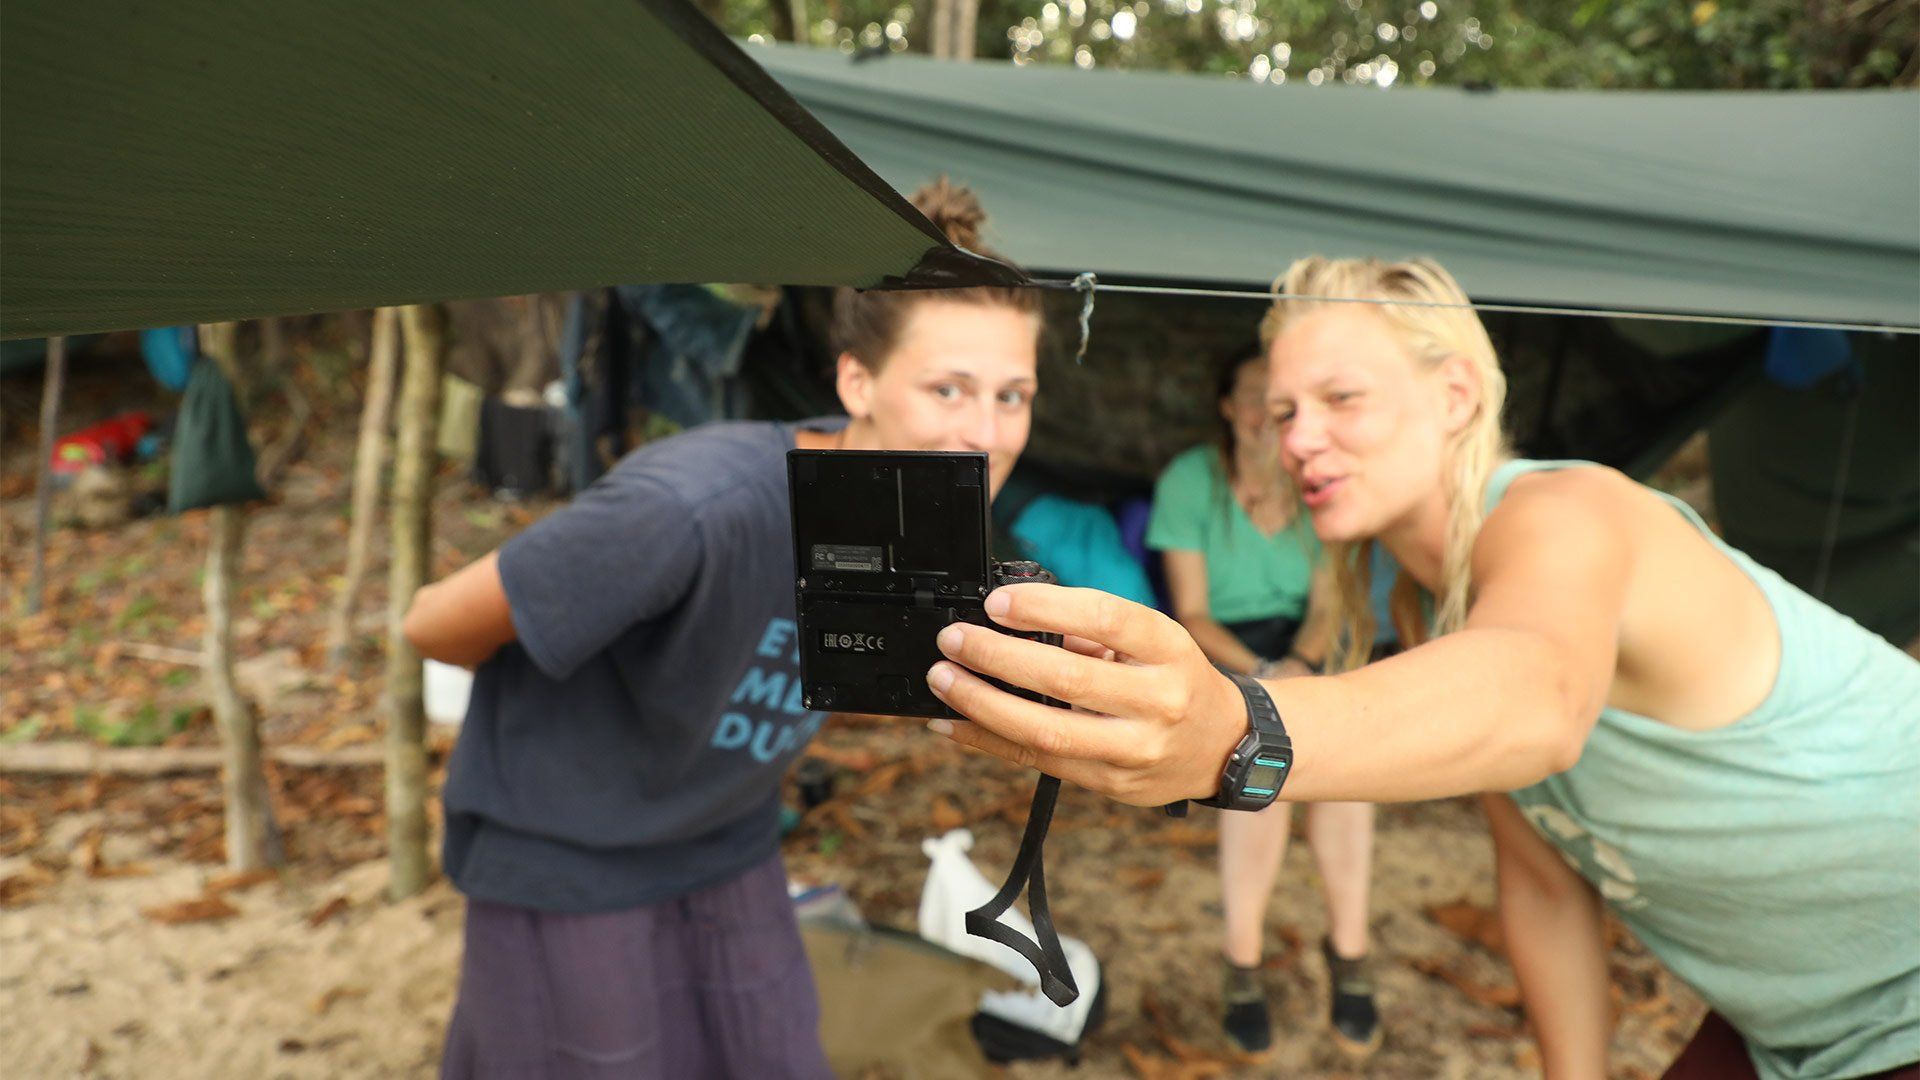 Laura and Ness Knight use a Canon PowerShot G7 X Mark II to film themselves in front of a tent in the jungle, inside which Pip Stewart is sitting.